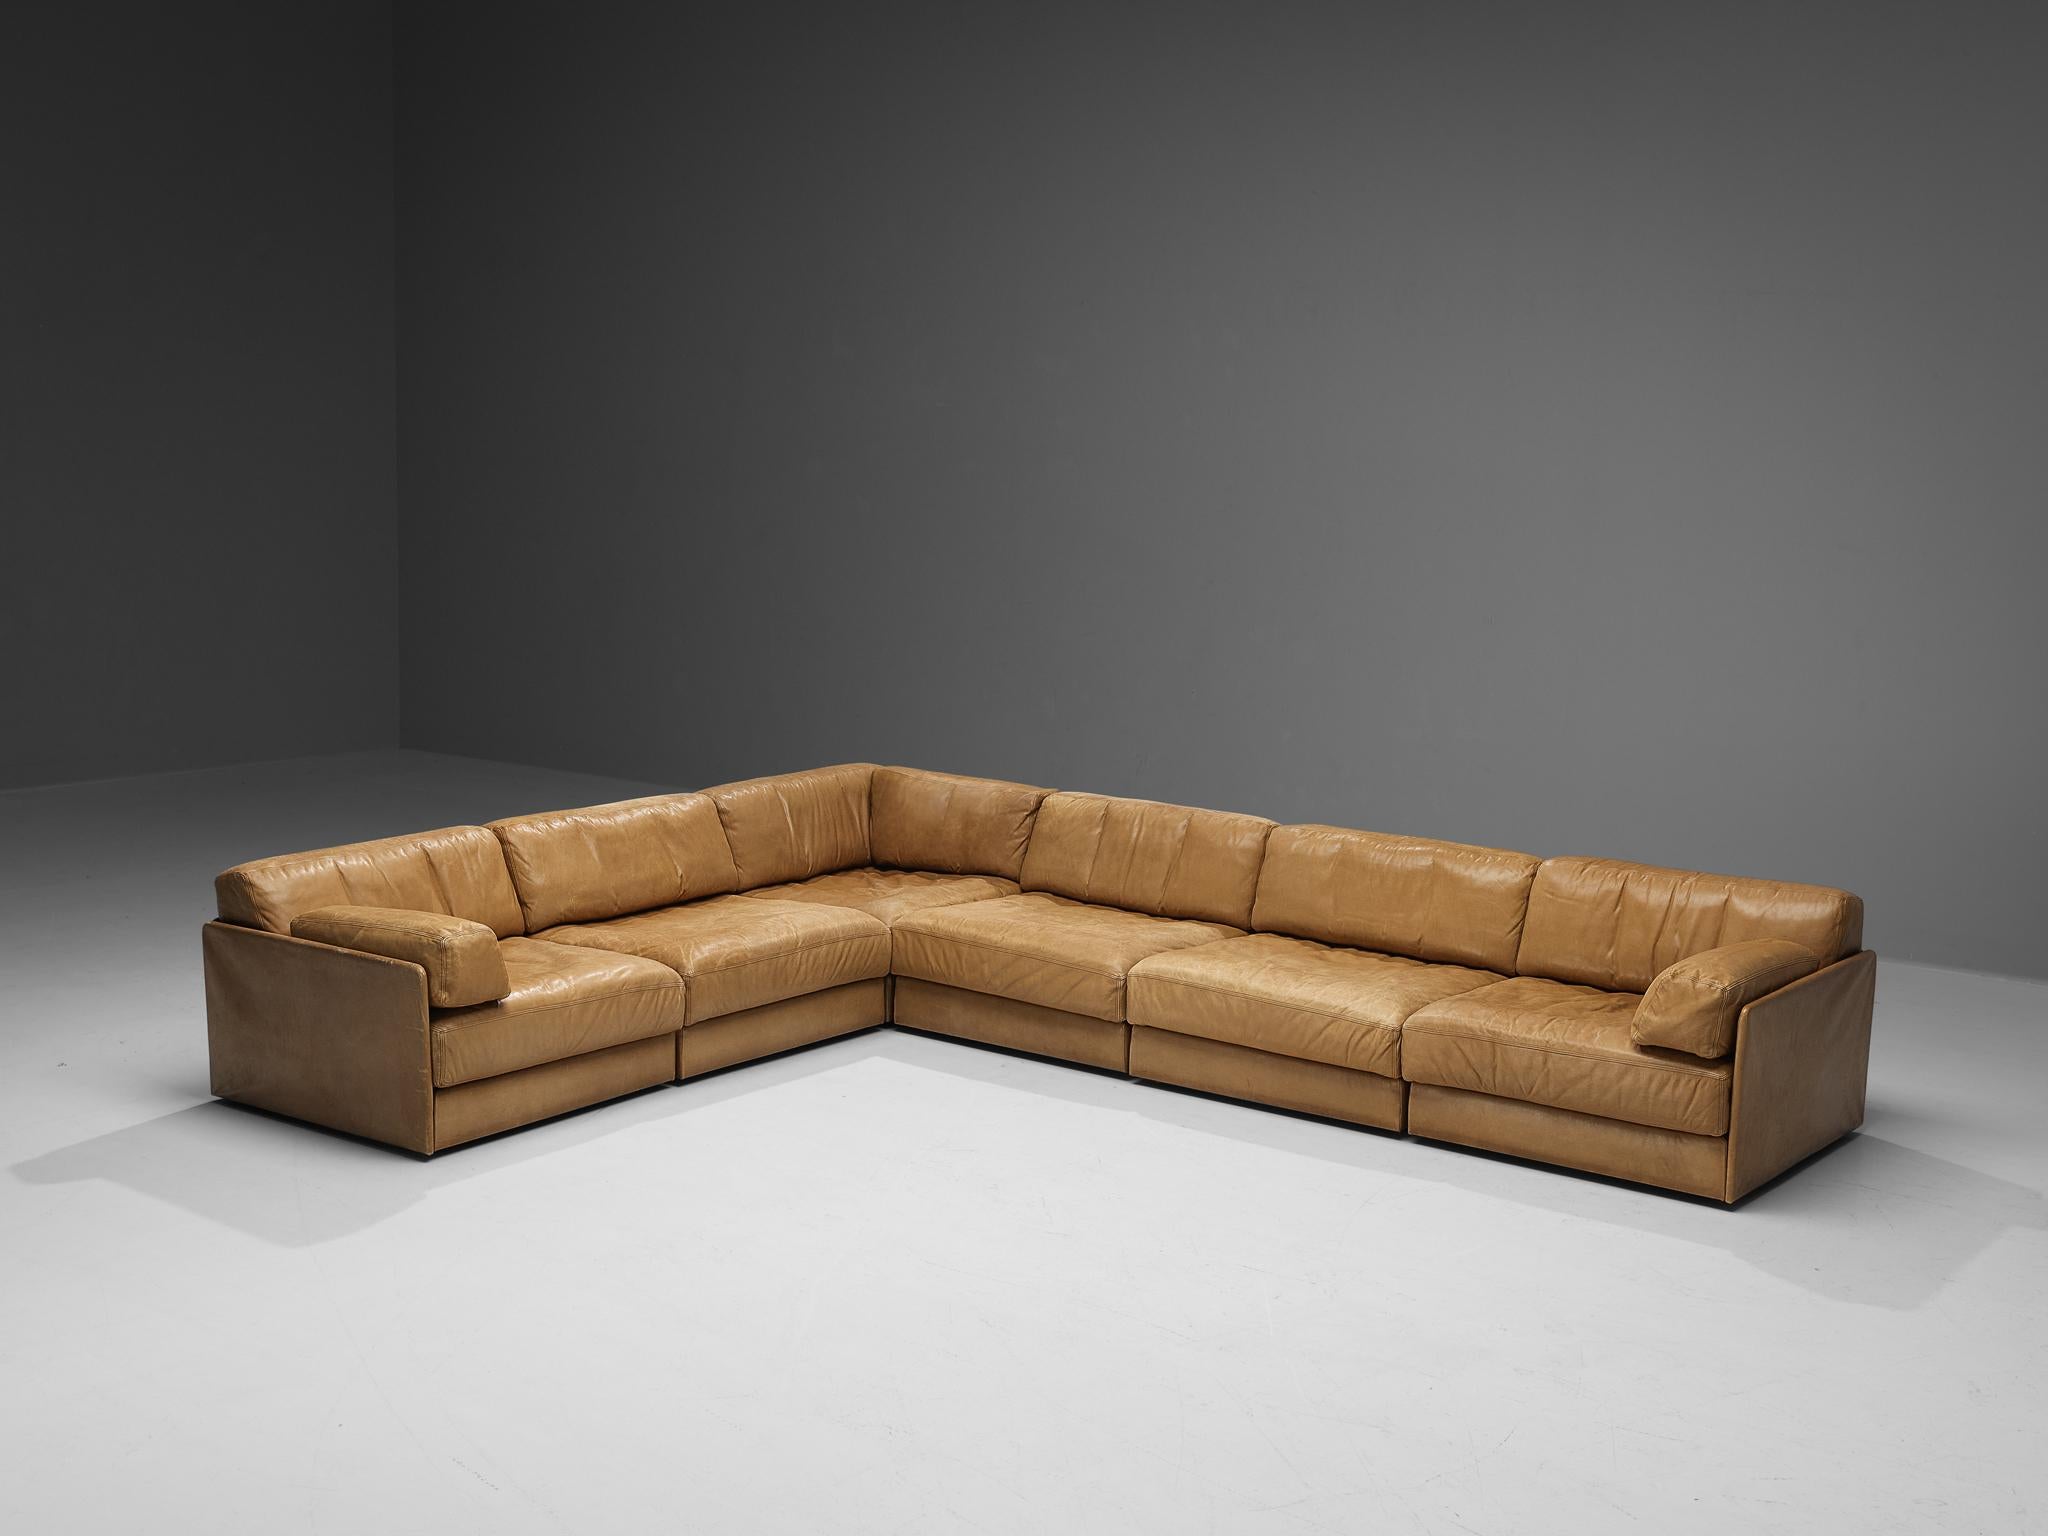 De Sede, 'DS-76' sectional sofa, leather, Switzerland, 1970s.

This high-quality sectional sofa designed by De Sede in the 1970s contains three regular elements and three corner elements, two of which have armrests, making it possible to arrange